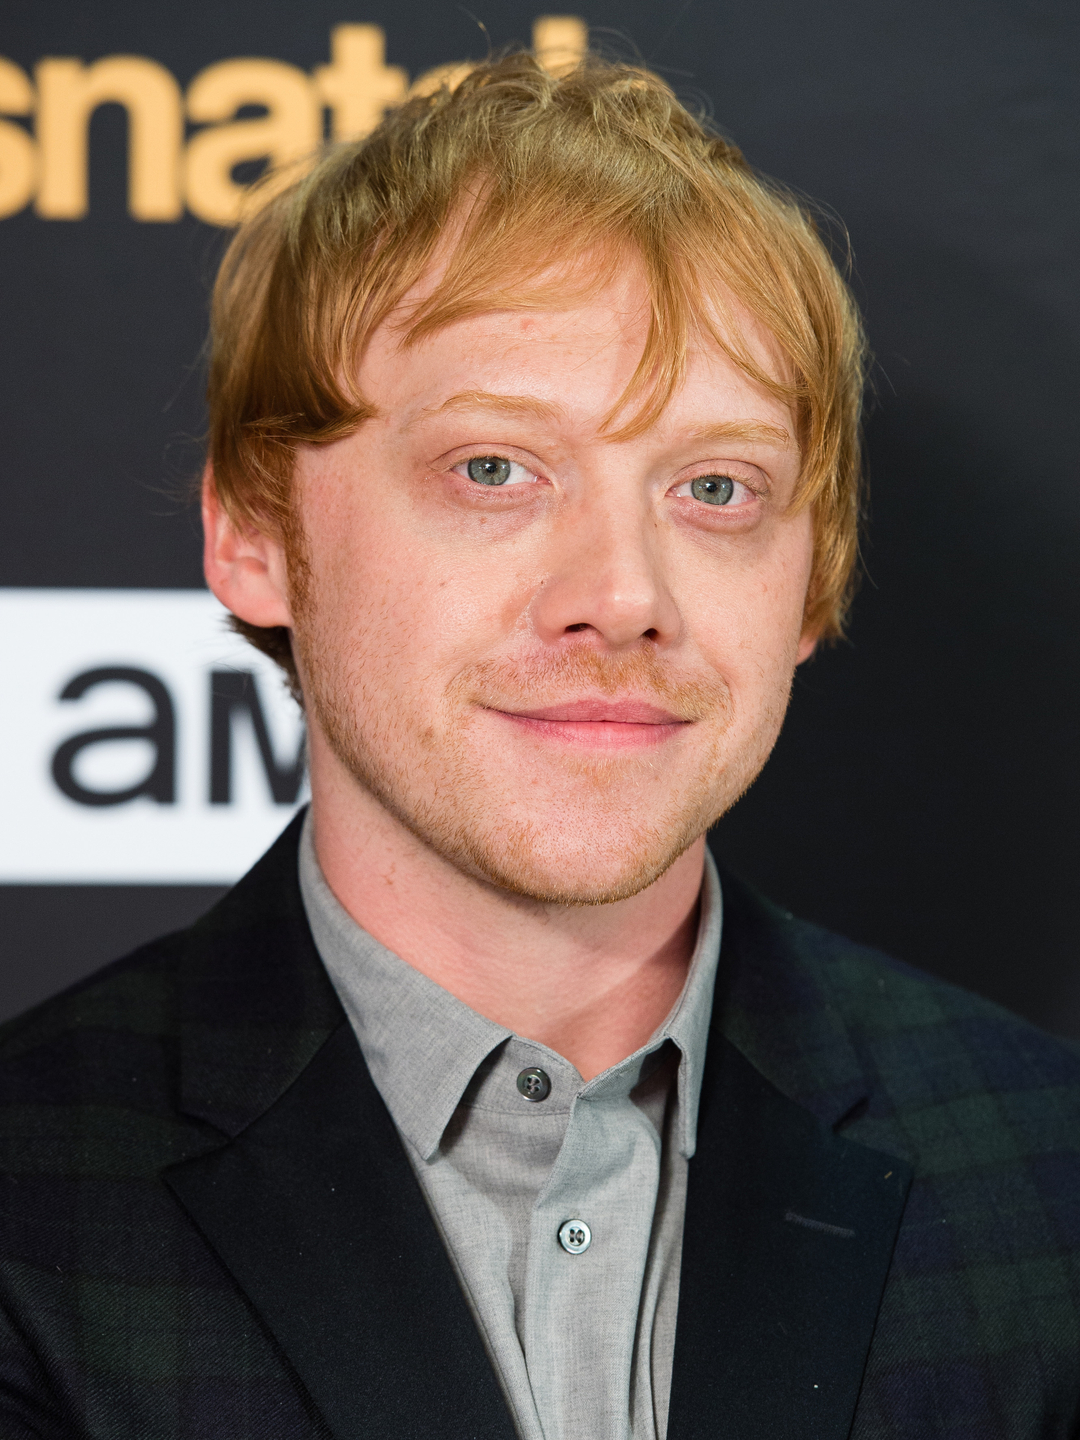 Rupert Grint who is his mother